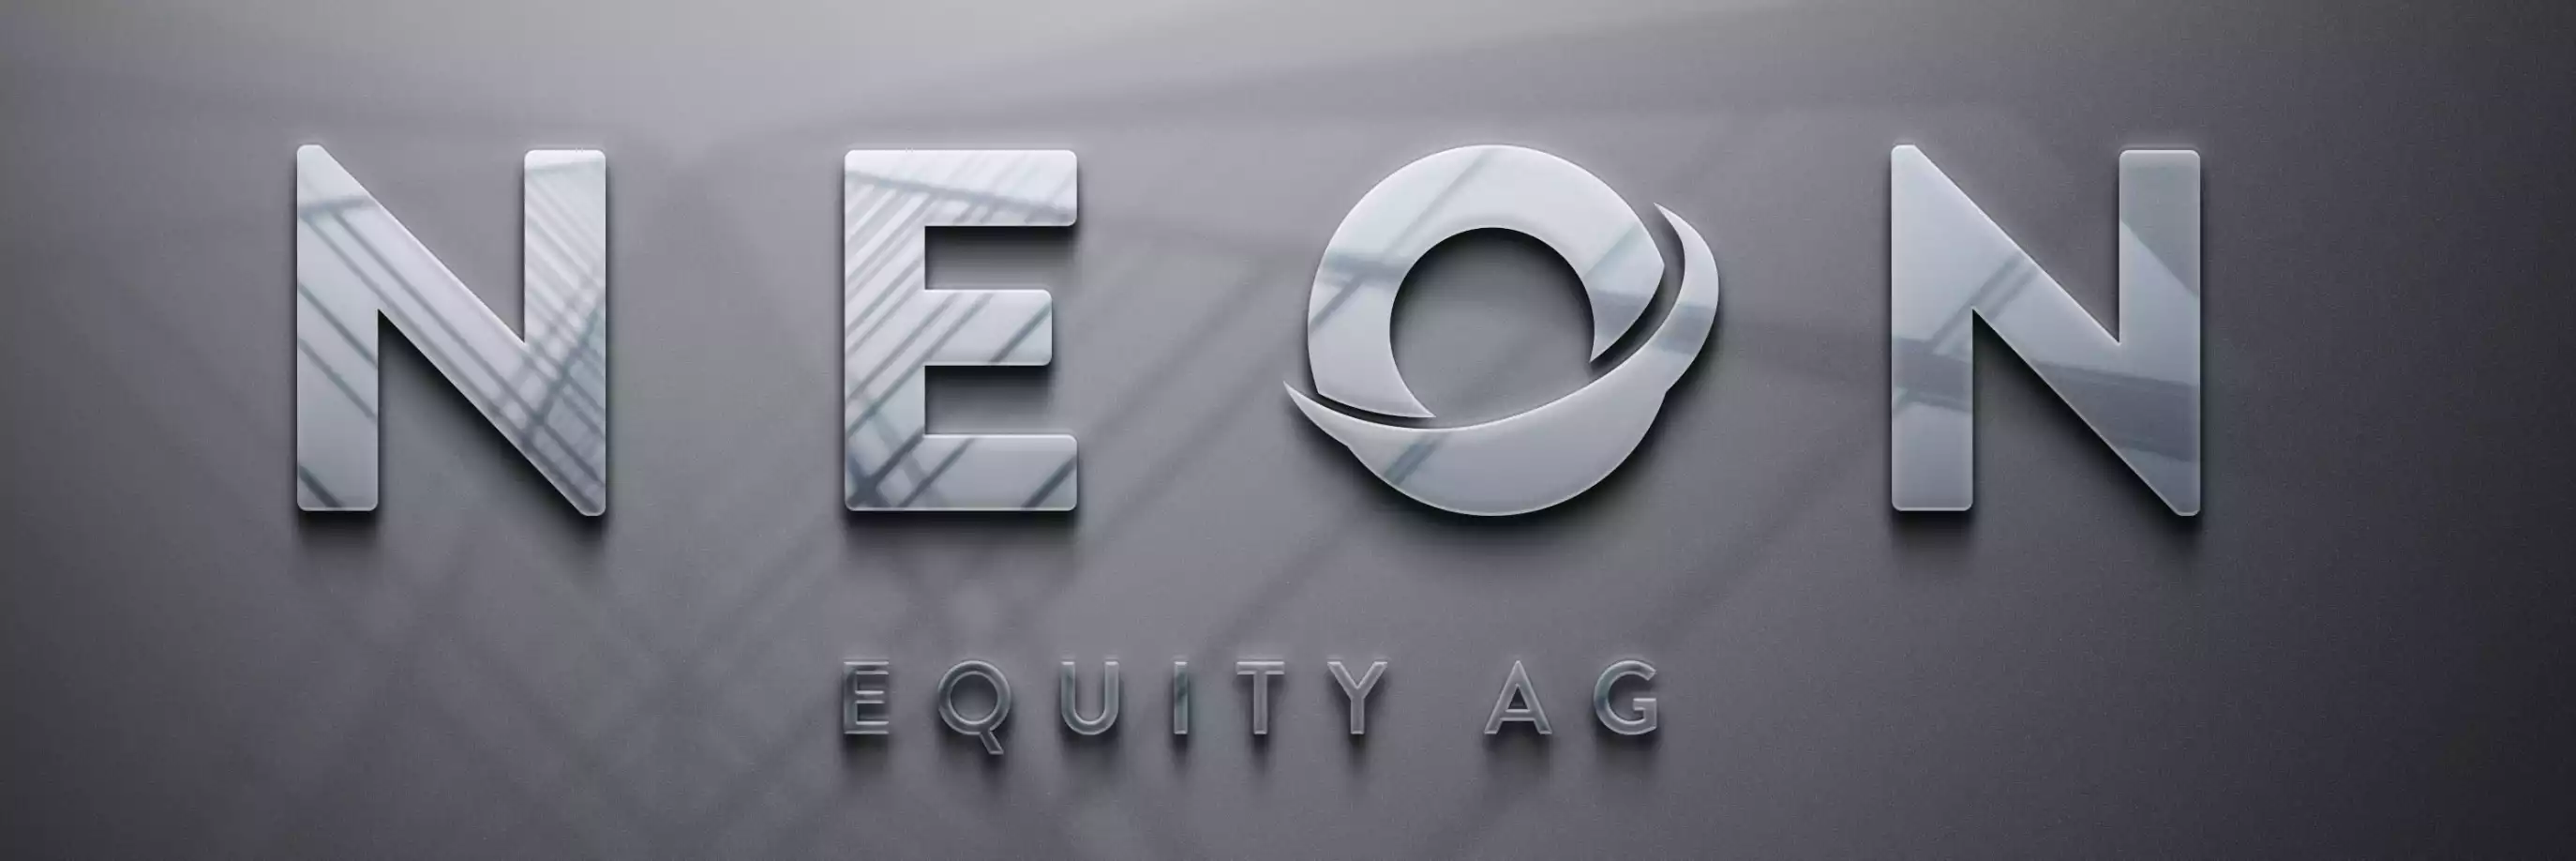  - NEON EQUITY AG